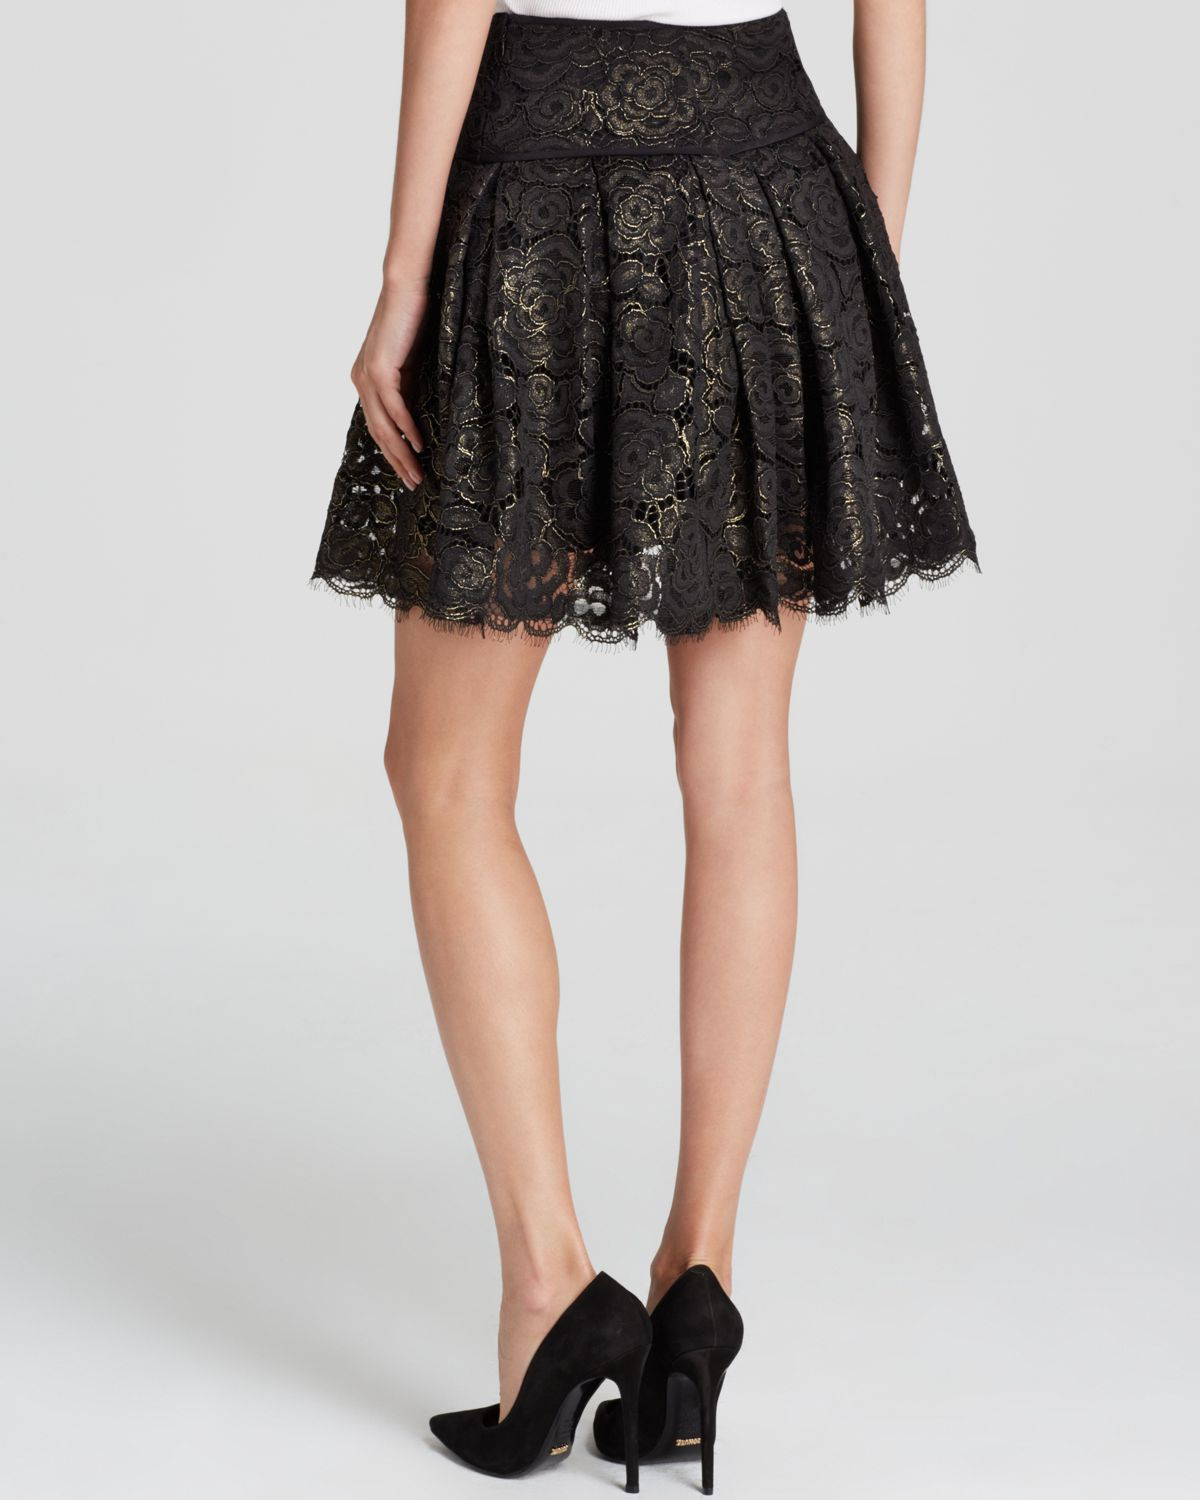 Lyst - Dkny Metallic Floral Lace Mini Skirt - Bloomingdale'S Exclusive ...